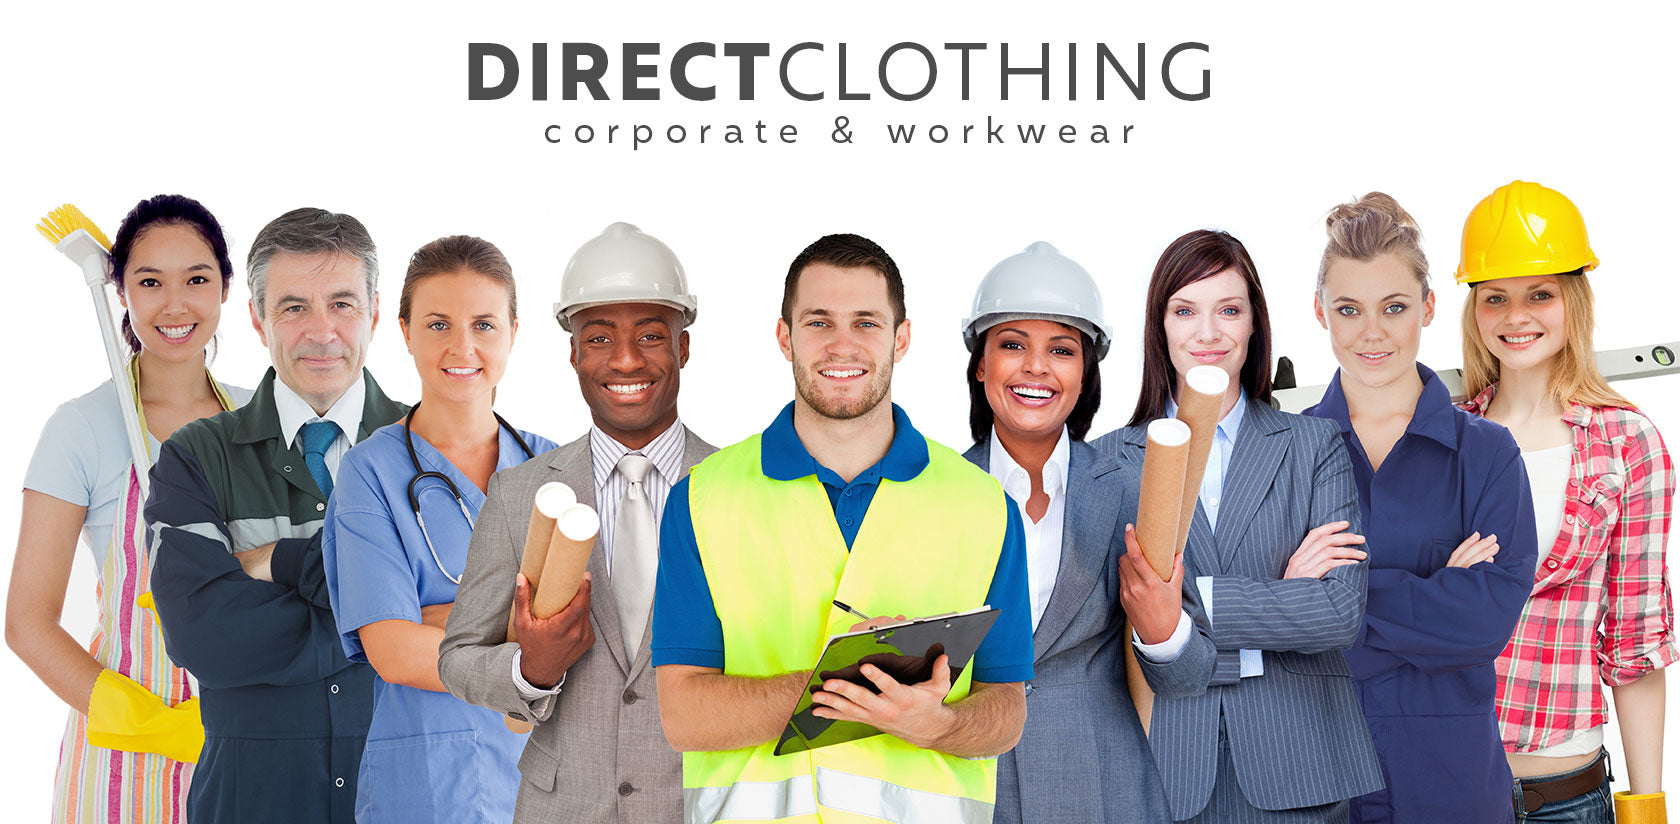 Corporate – Direct Clothing